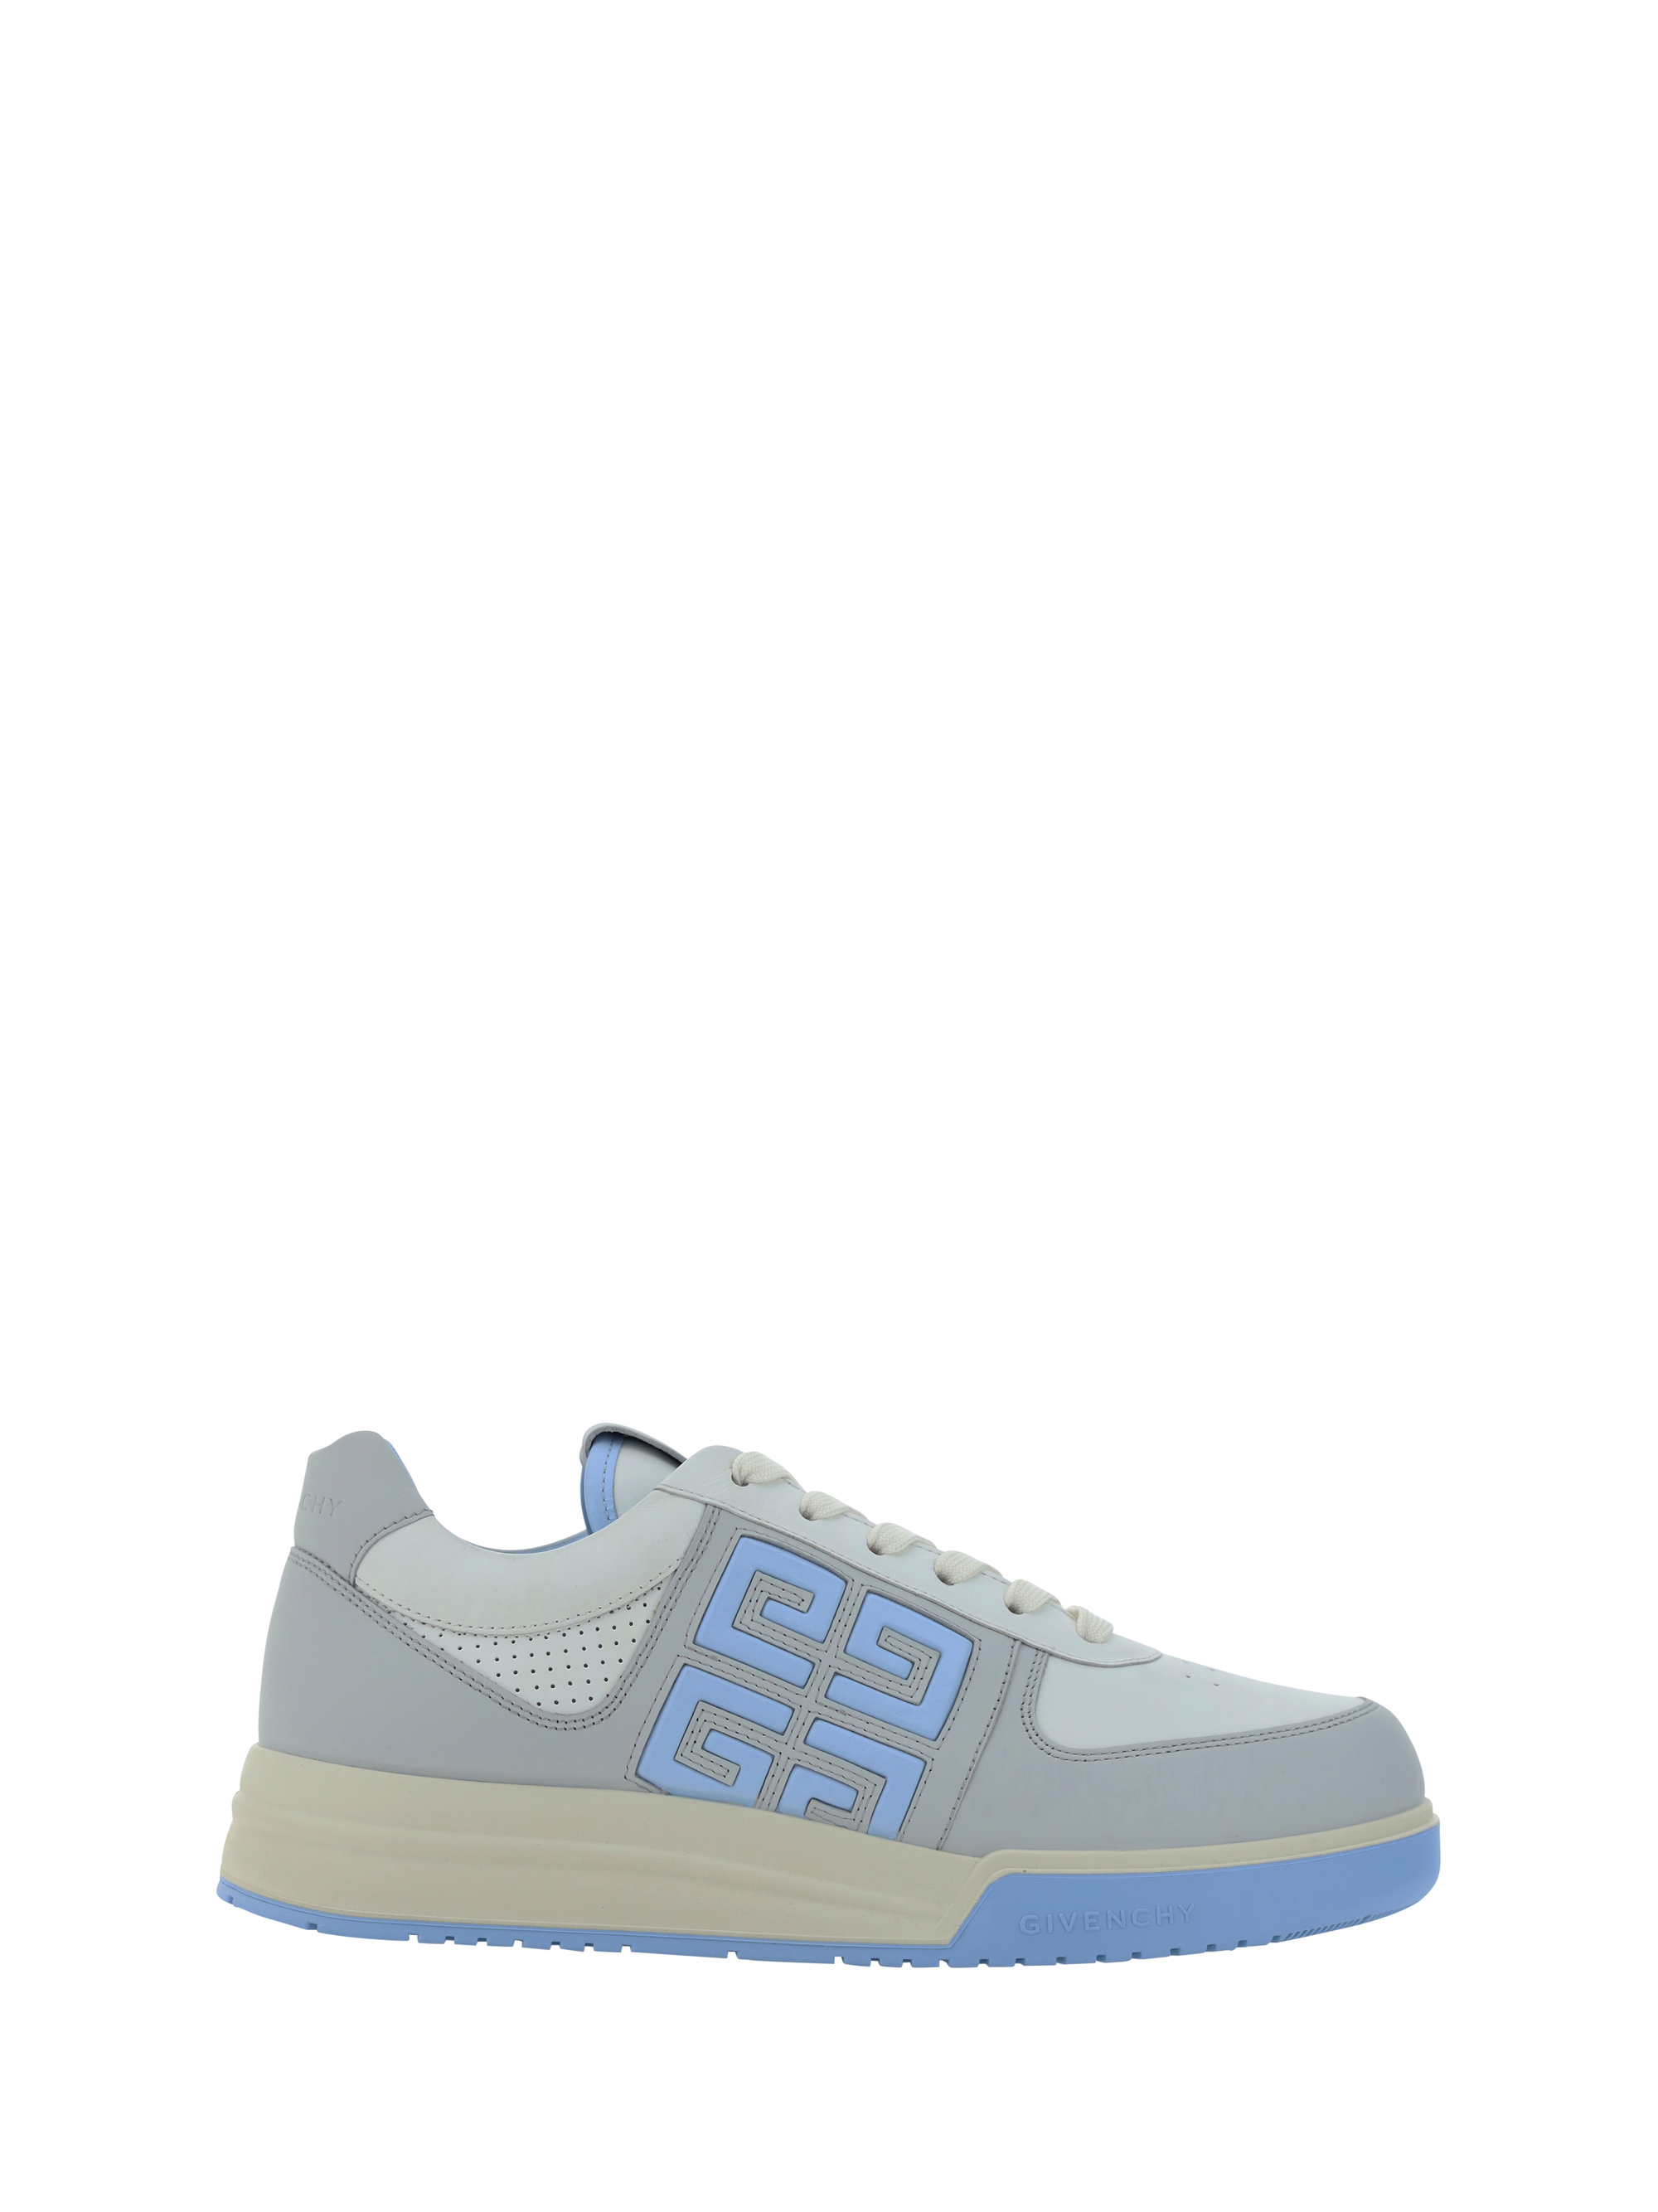 Shop Givenchy G4 Low Top Sneakers In Grey/blue